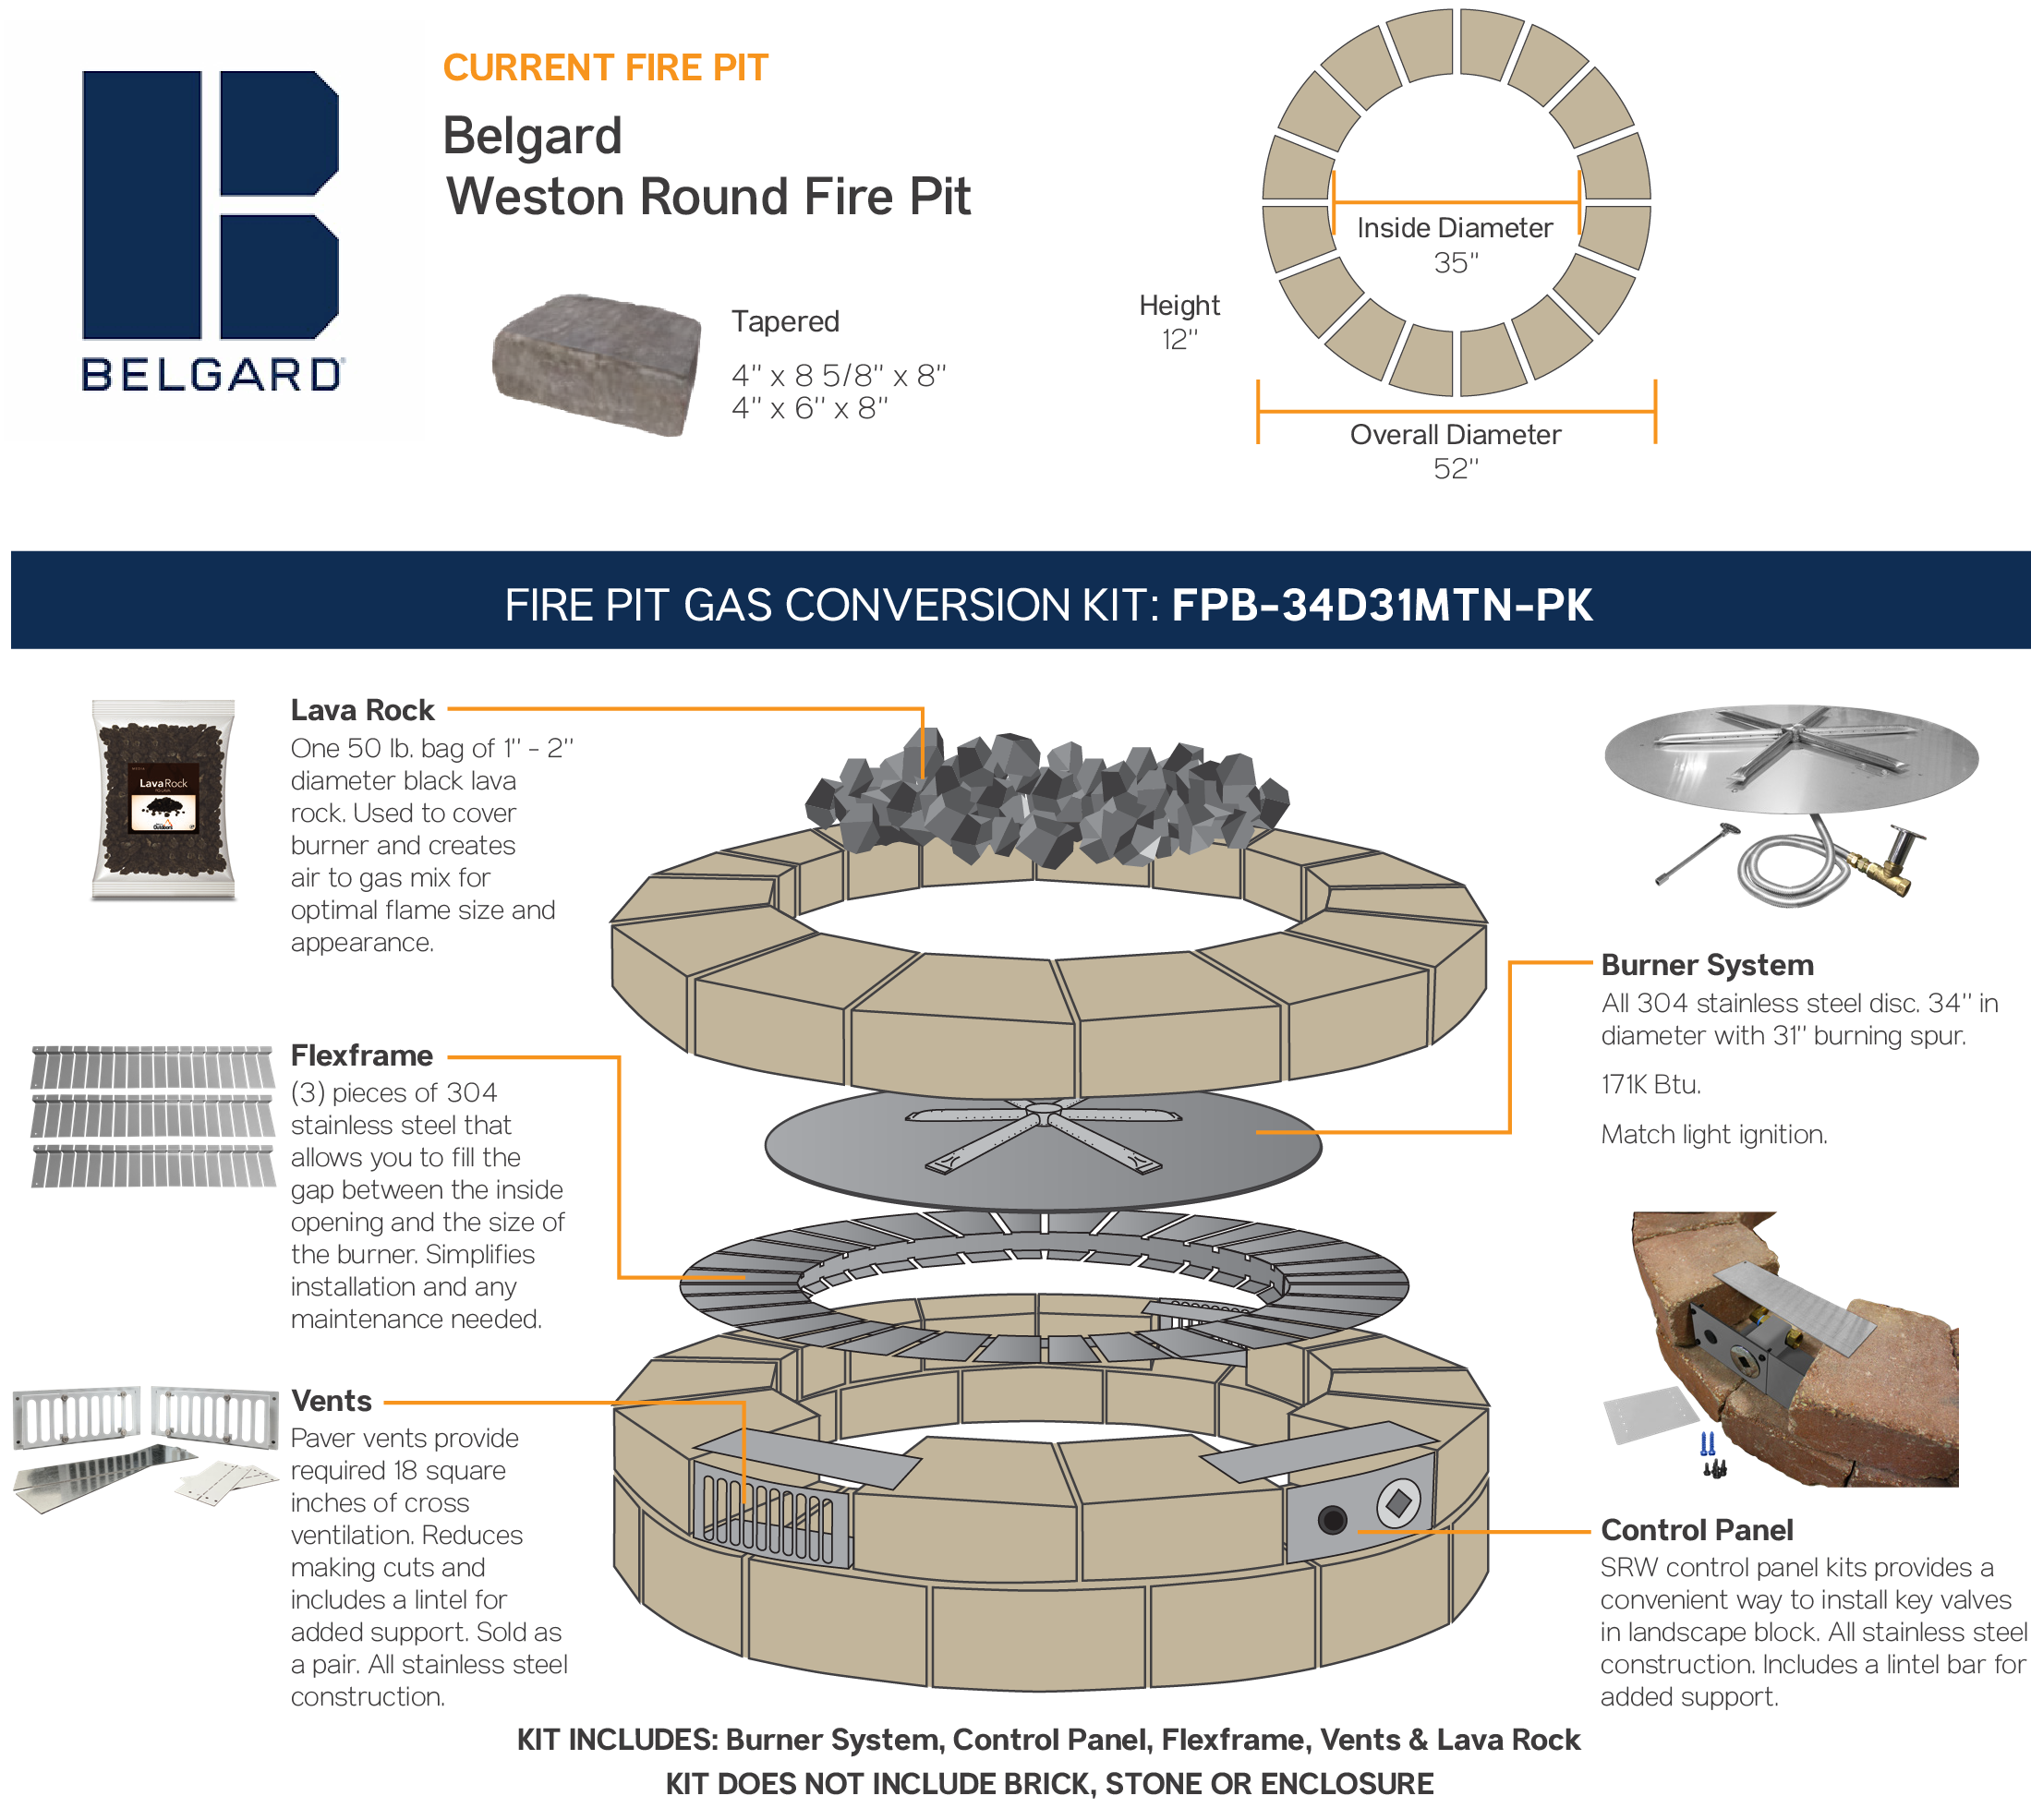 Gas Conversion Kit Belgard Weston Round Fire Pit Fireboulder Com Natural Stone Fire Pits Fireplaces And More